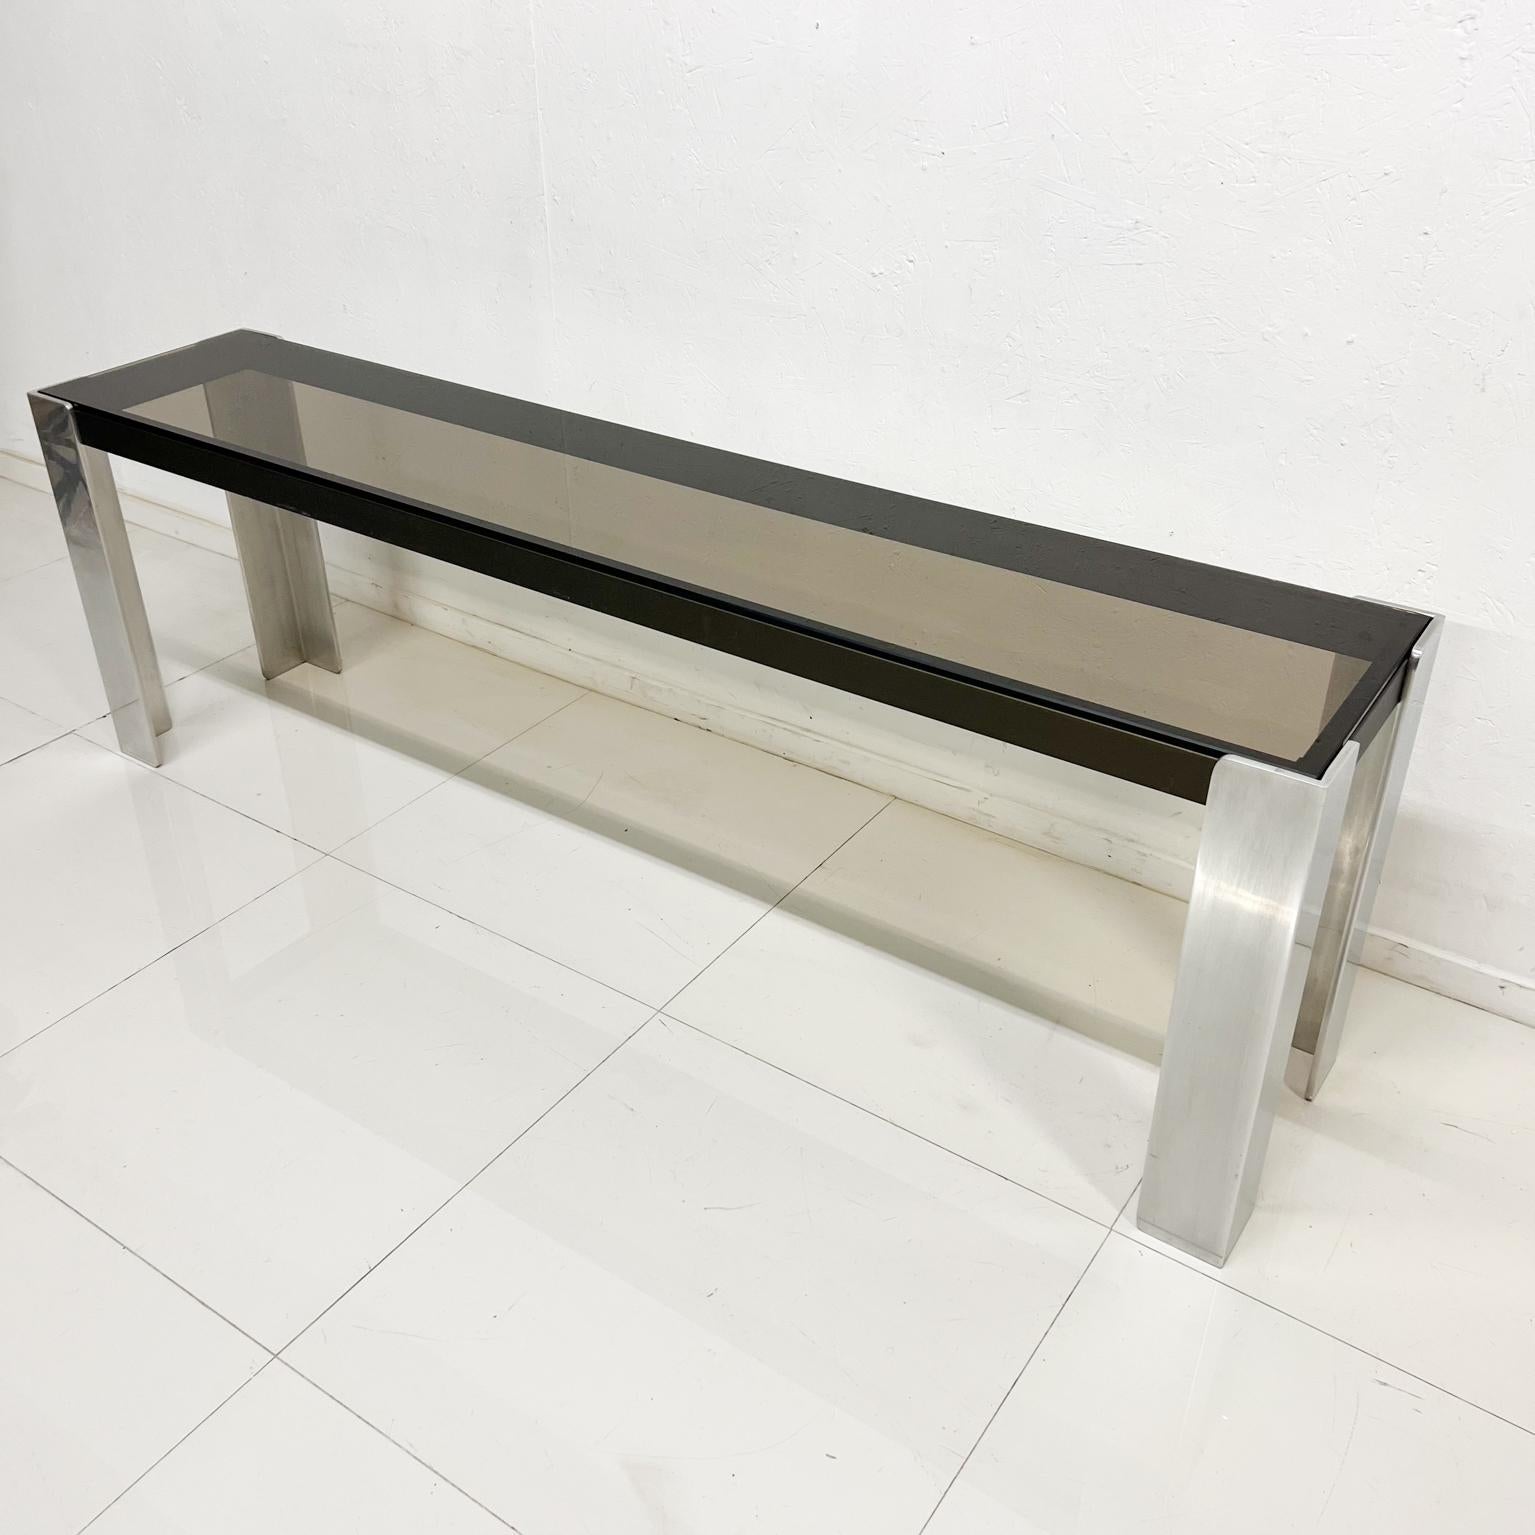 1970s Modernist Square Aluminum Coffee Table Style of Milo Baughman 4